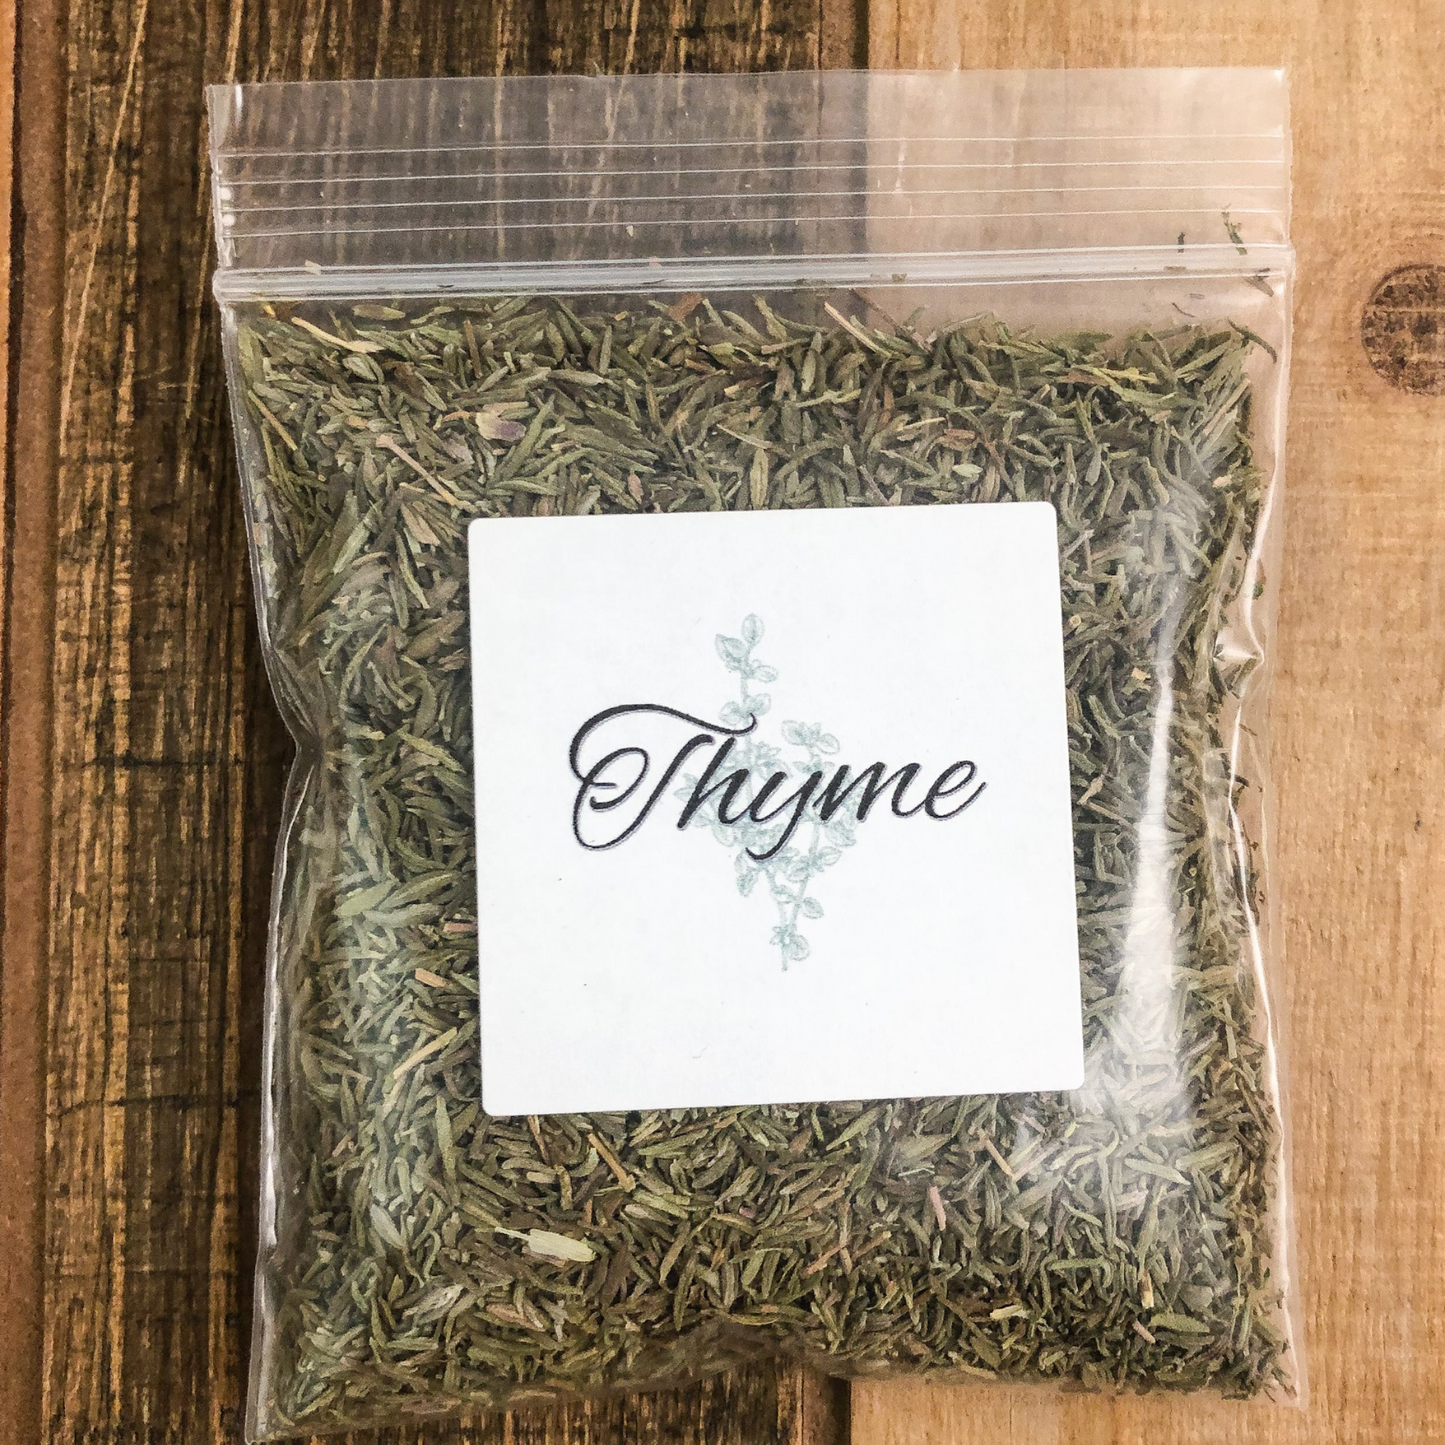 8g bag of dried thyme in a clear plastic bag with a wooden background